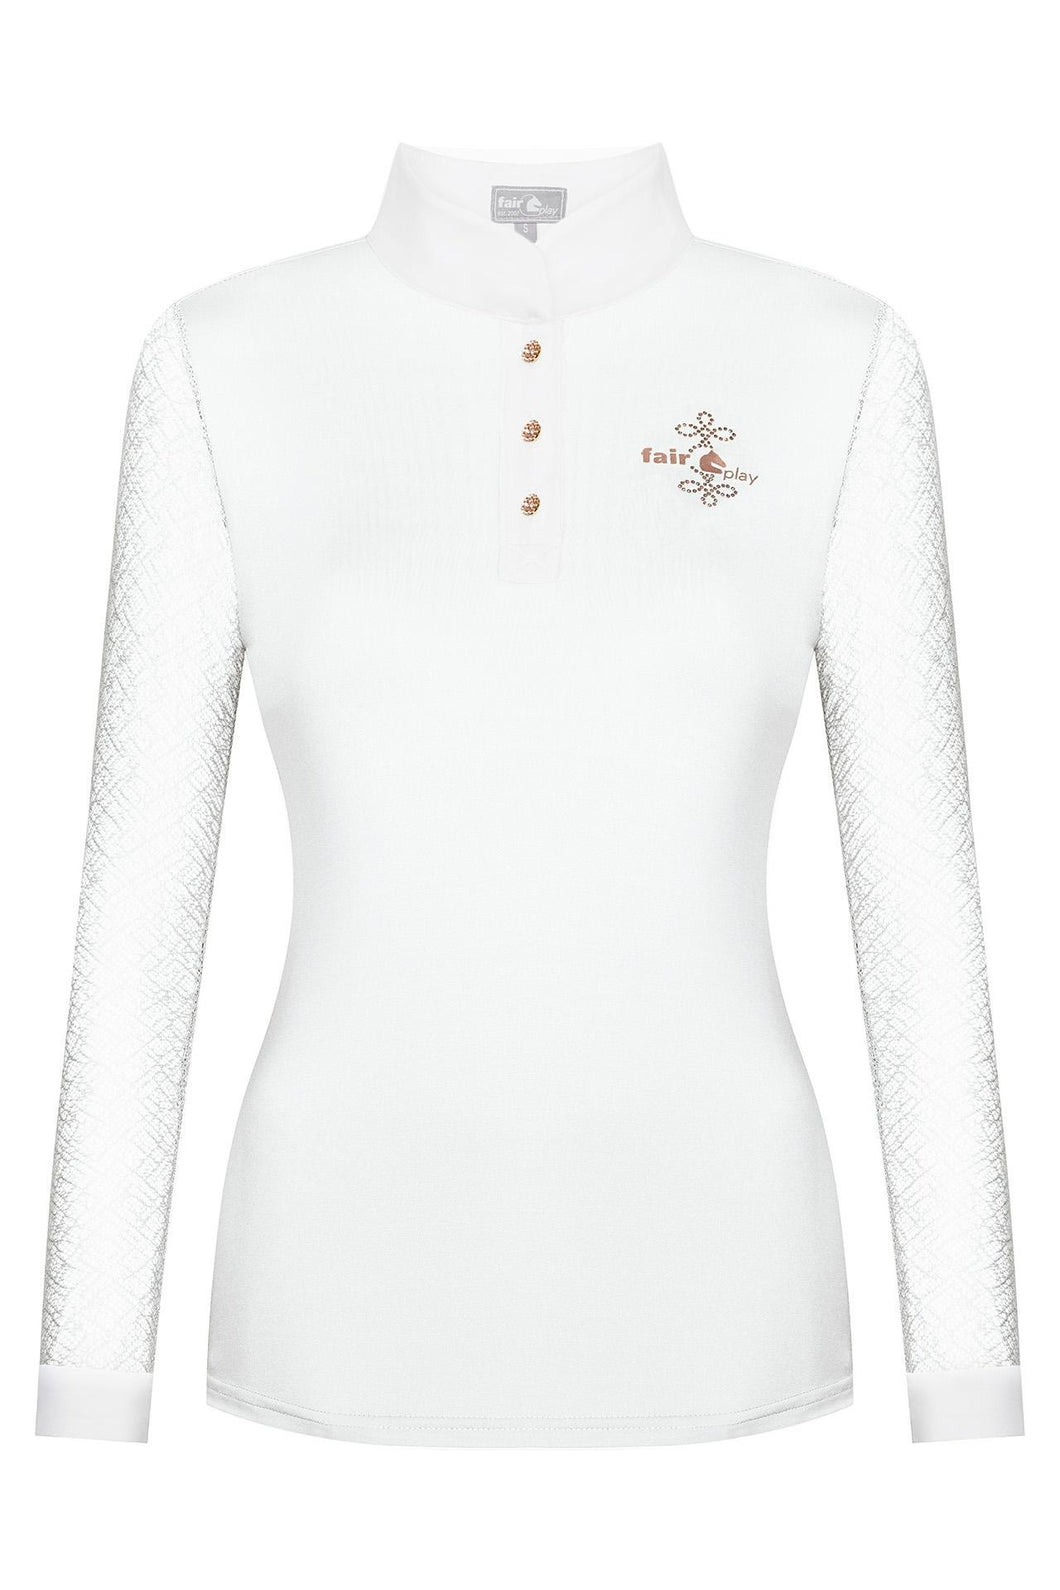 Fair Play Competition Long Sleeve Shirt CECILE ROSEGOLD, White